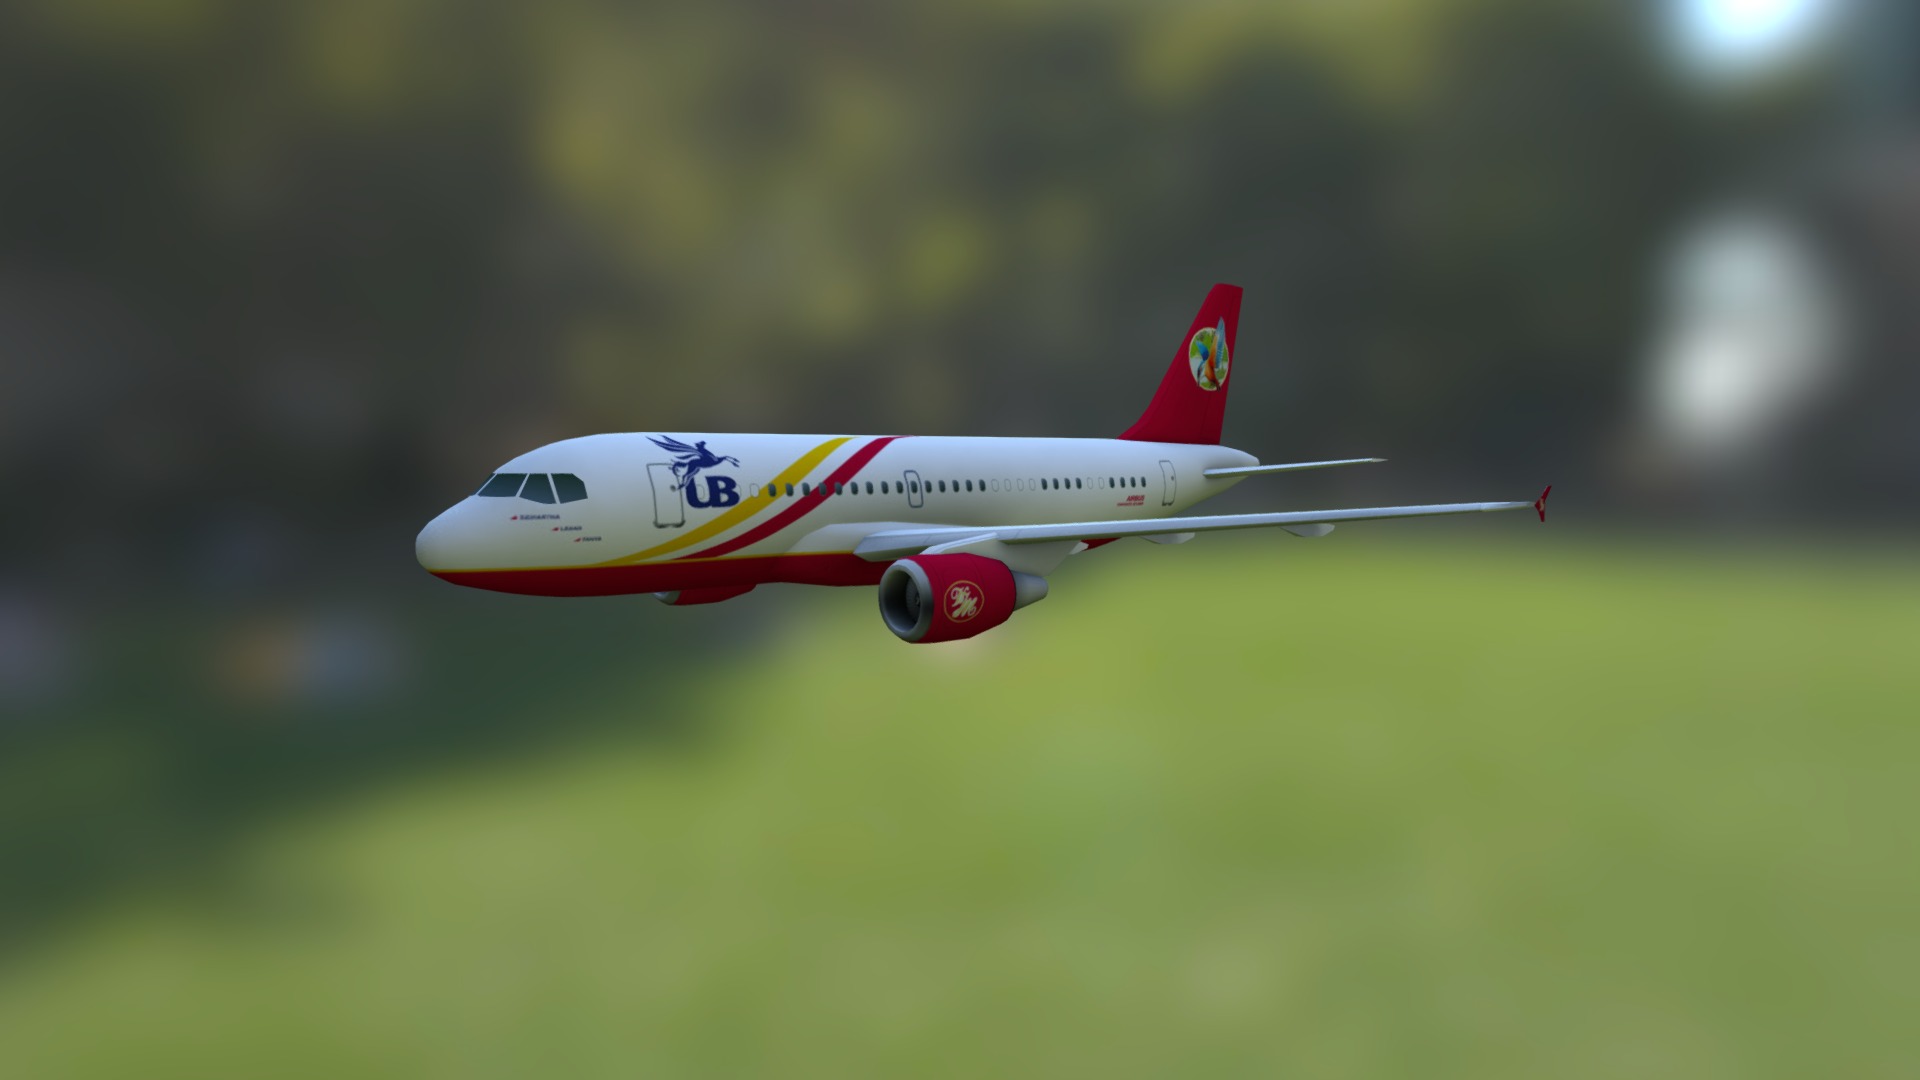 3D model Airbus A319 - This is a 3D model of the Airbus A319. The 3D model is about a plane flying in the sky.